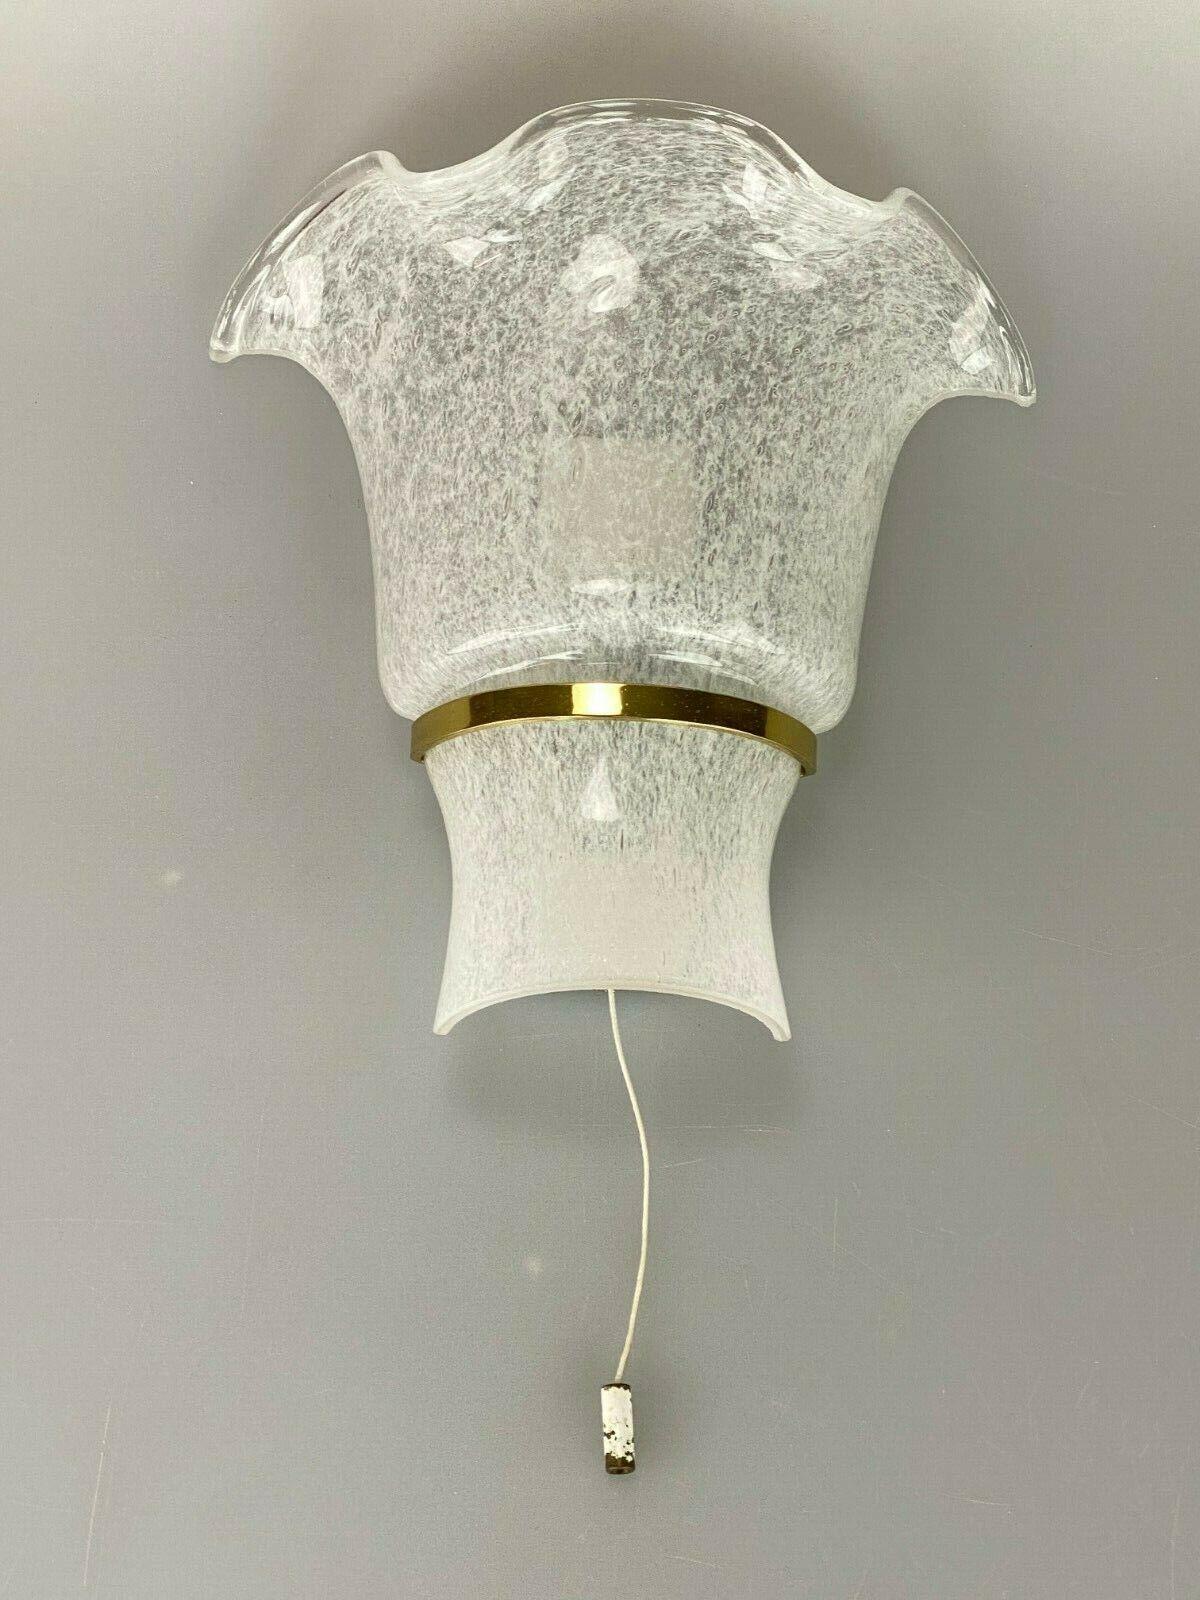 60s 70s Doria lamp light wall lamp wall lamp Space Age 60s design

Object: wall lamp

Manufacturer: Doria

Condition: good

Age: around 1960-1970

Dimensions:

22cm x 11.5cm x 19.5cm

Other notes:

The pictures serve as part of the